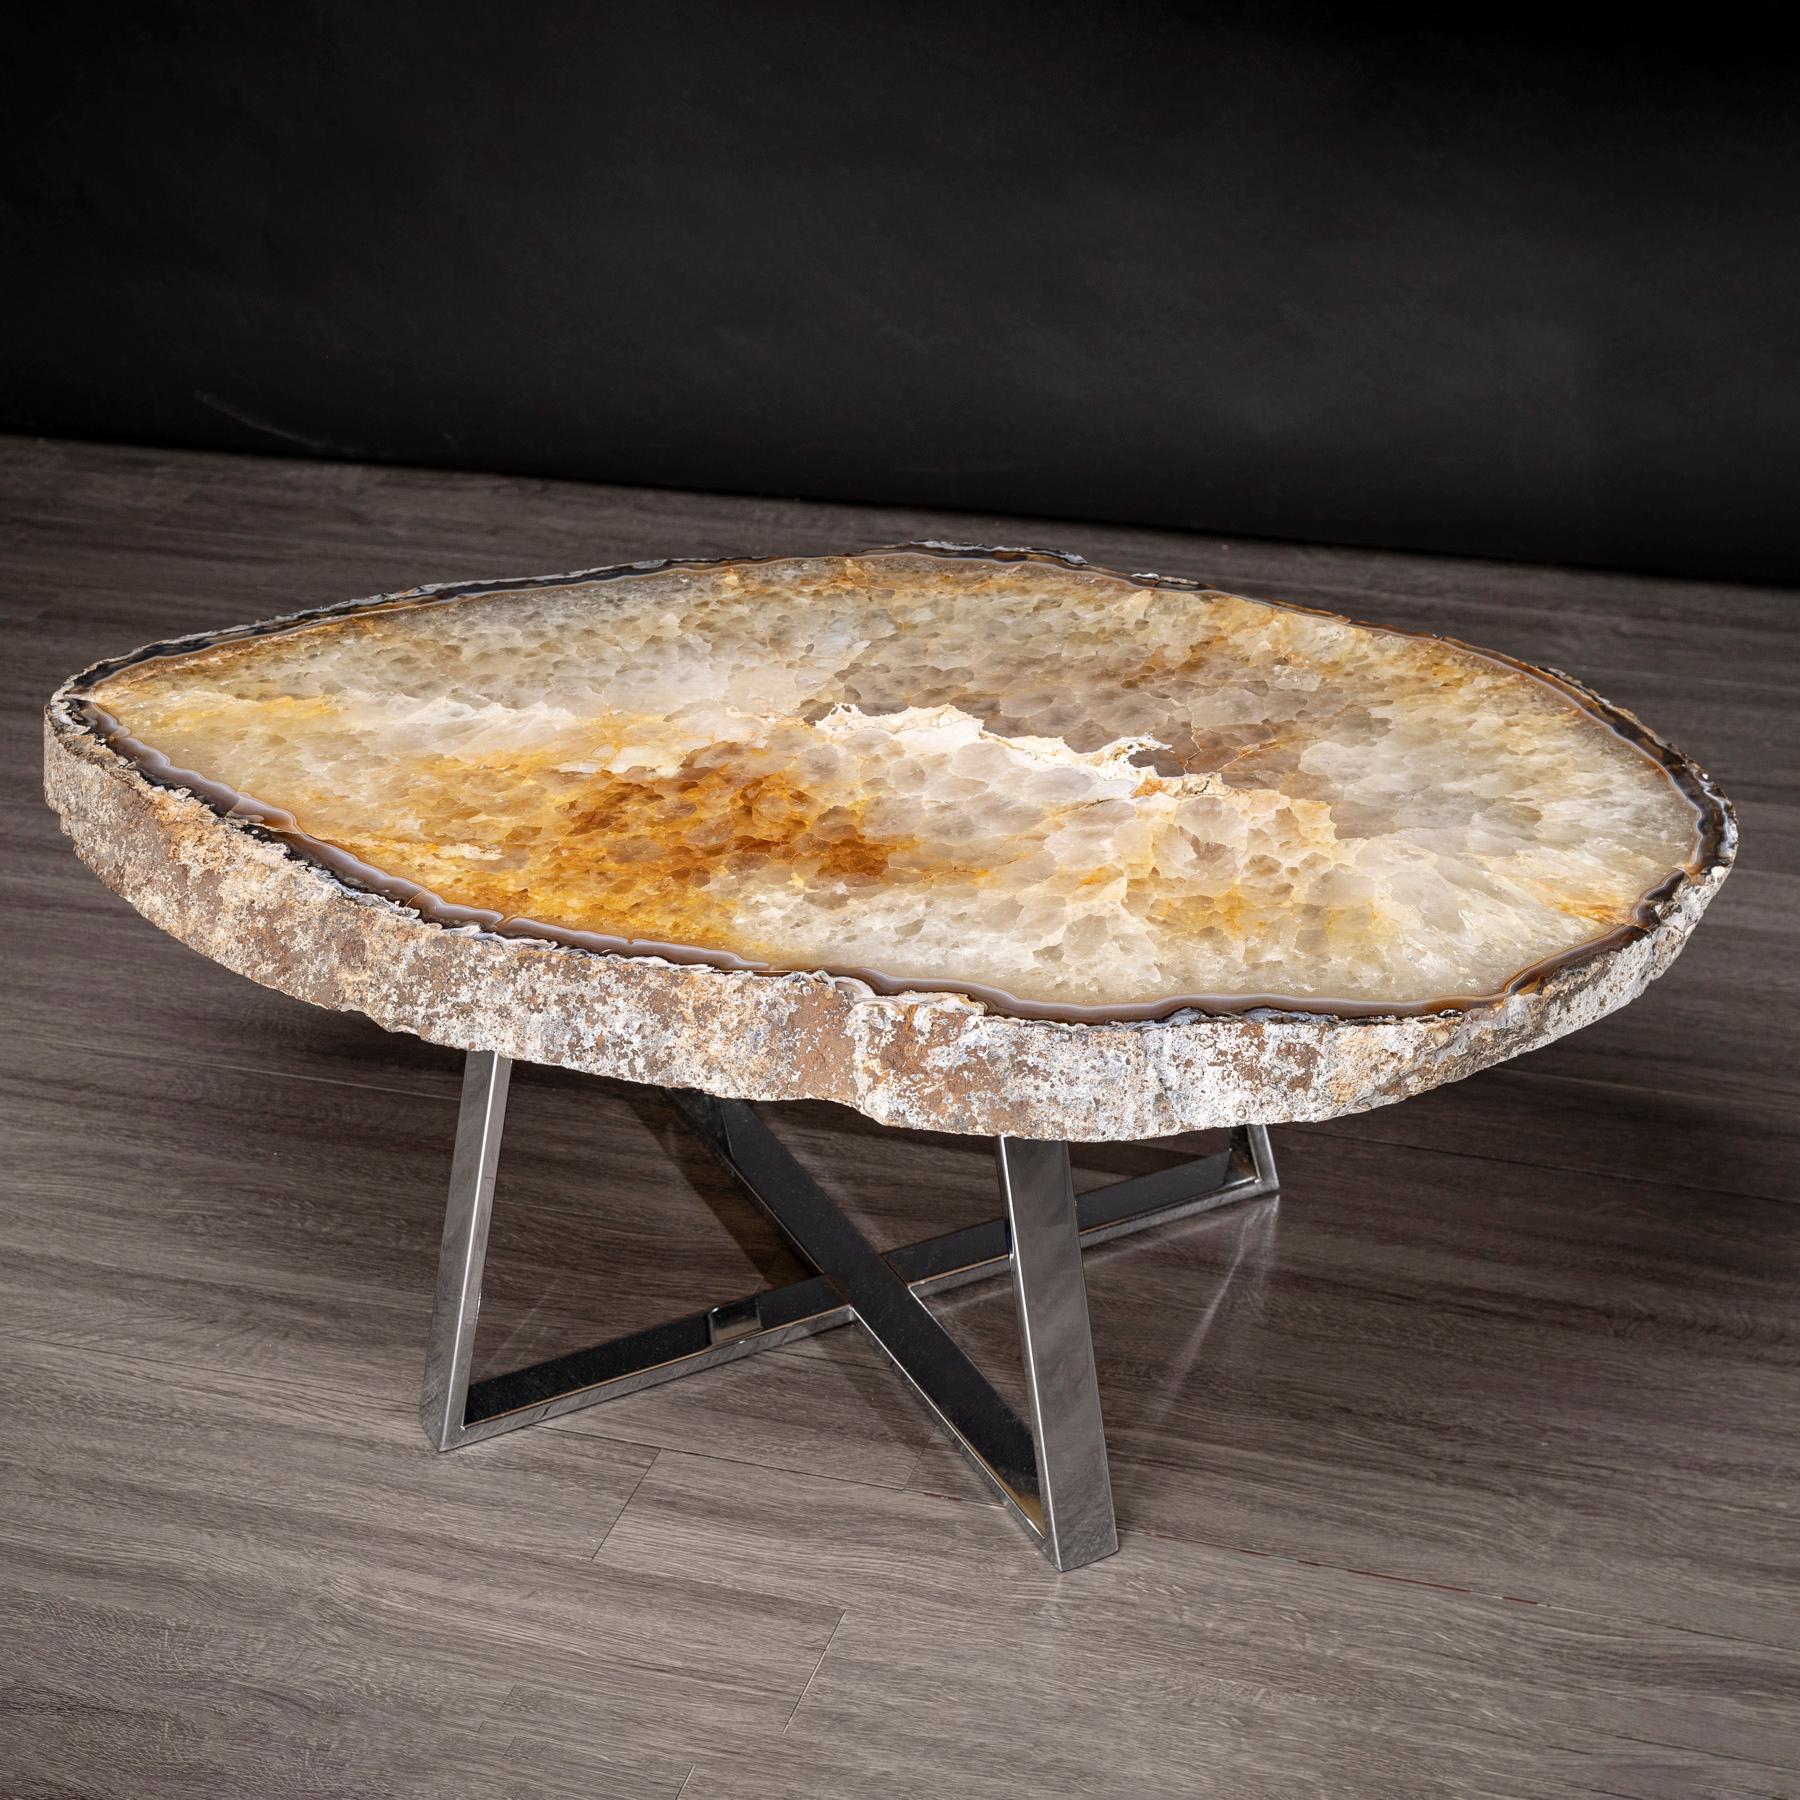 Organic Modern Side or Center Table, Brazilian Agate with Nickel Finish Metal Base